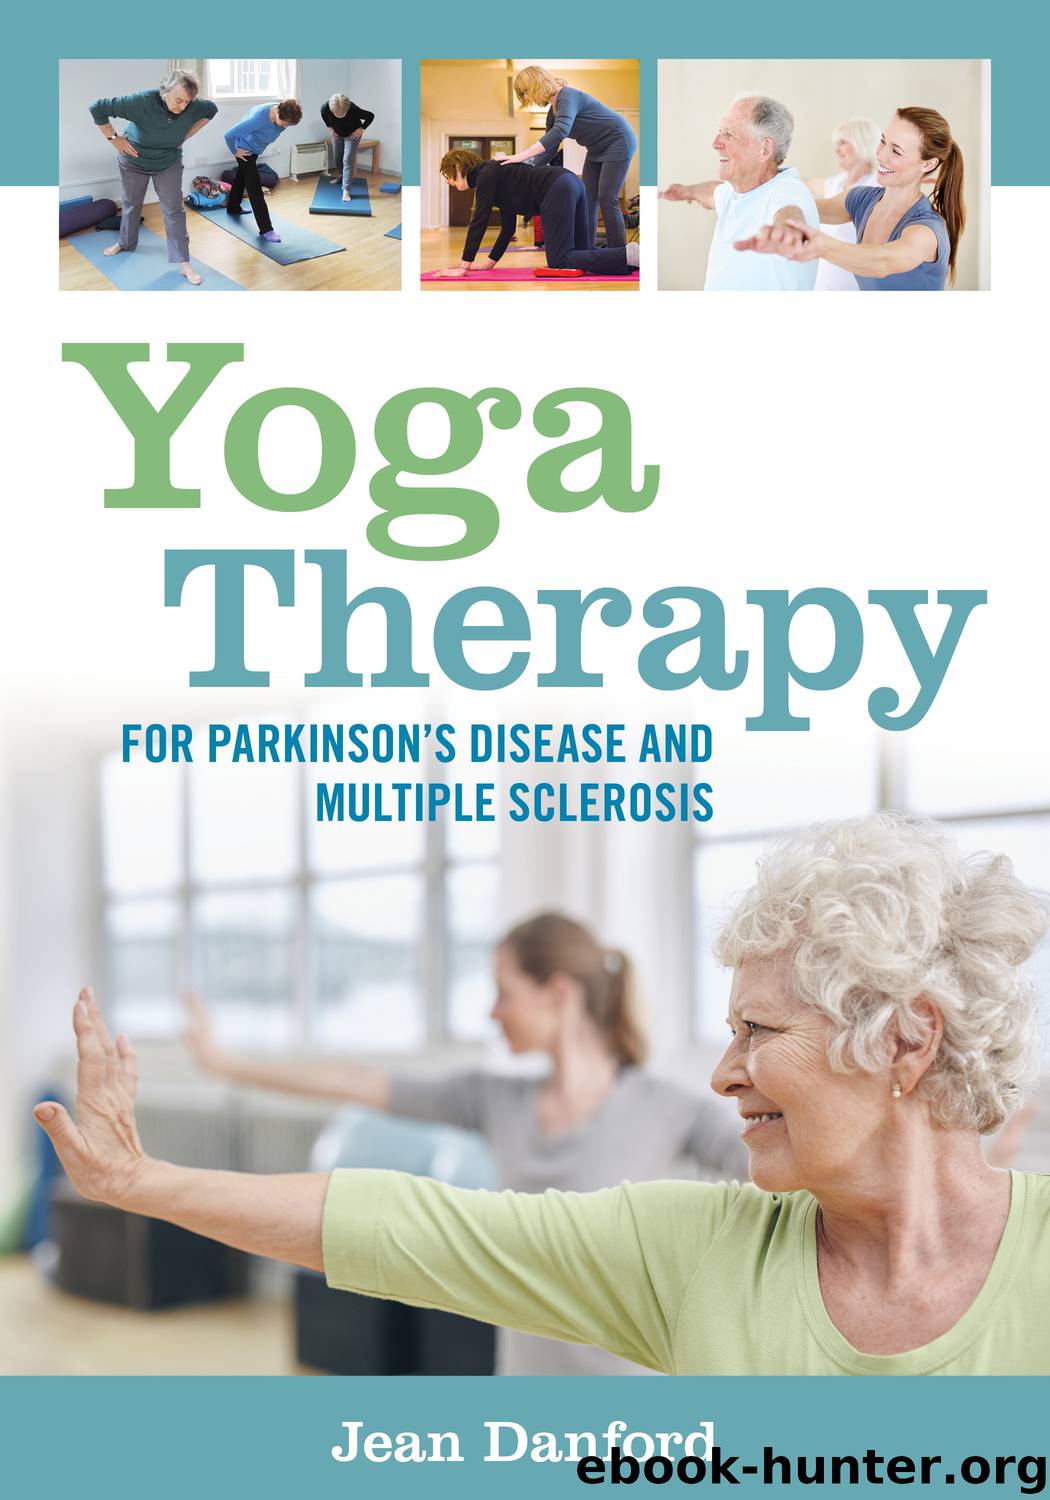 Yoga Therapy for Parkinson's Disease and Multiple Sclerosis by Jean Danford